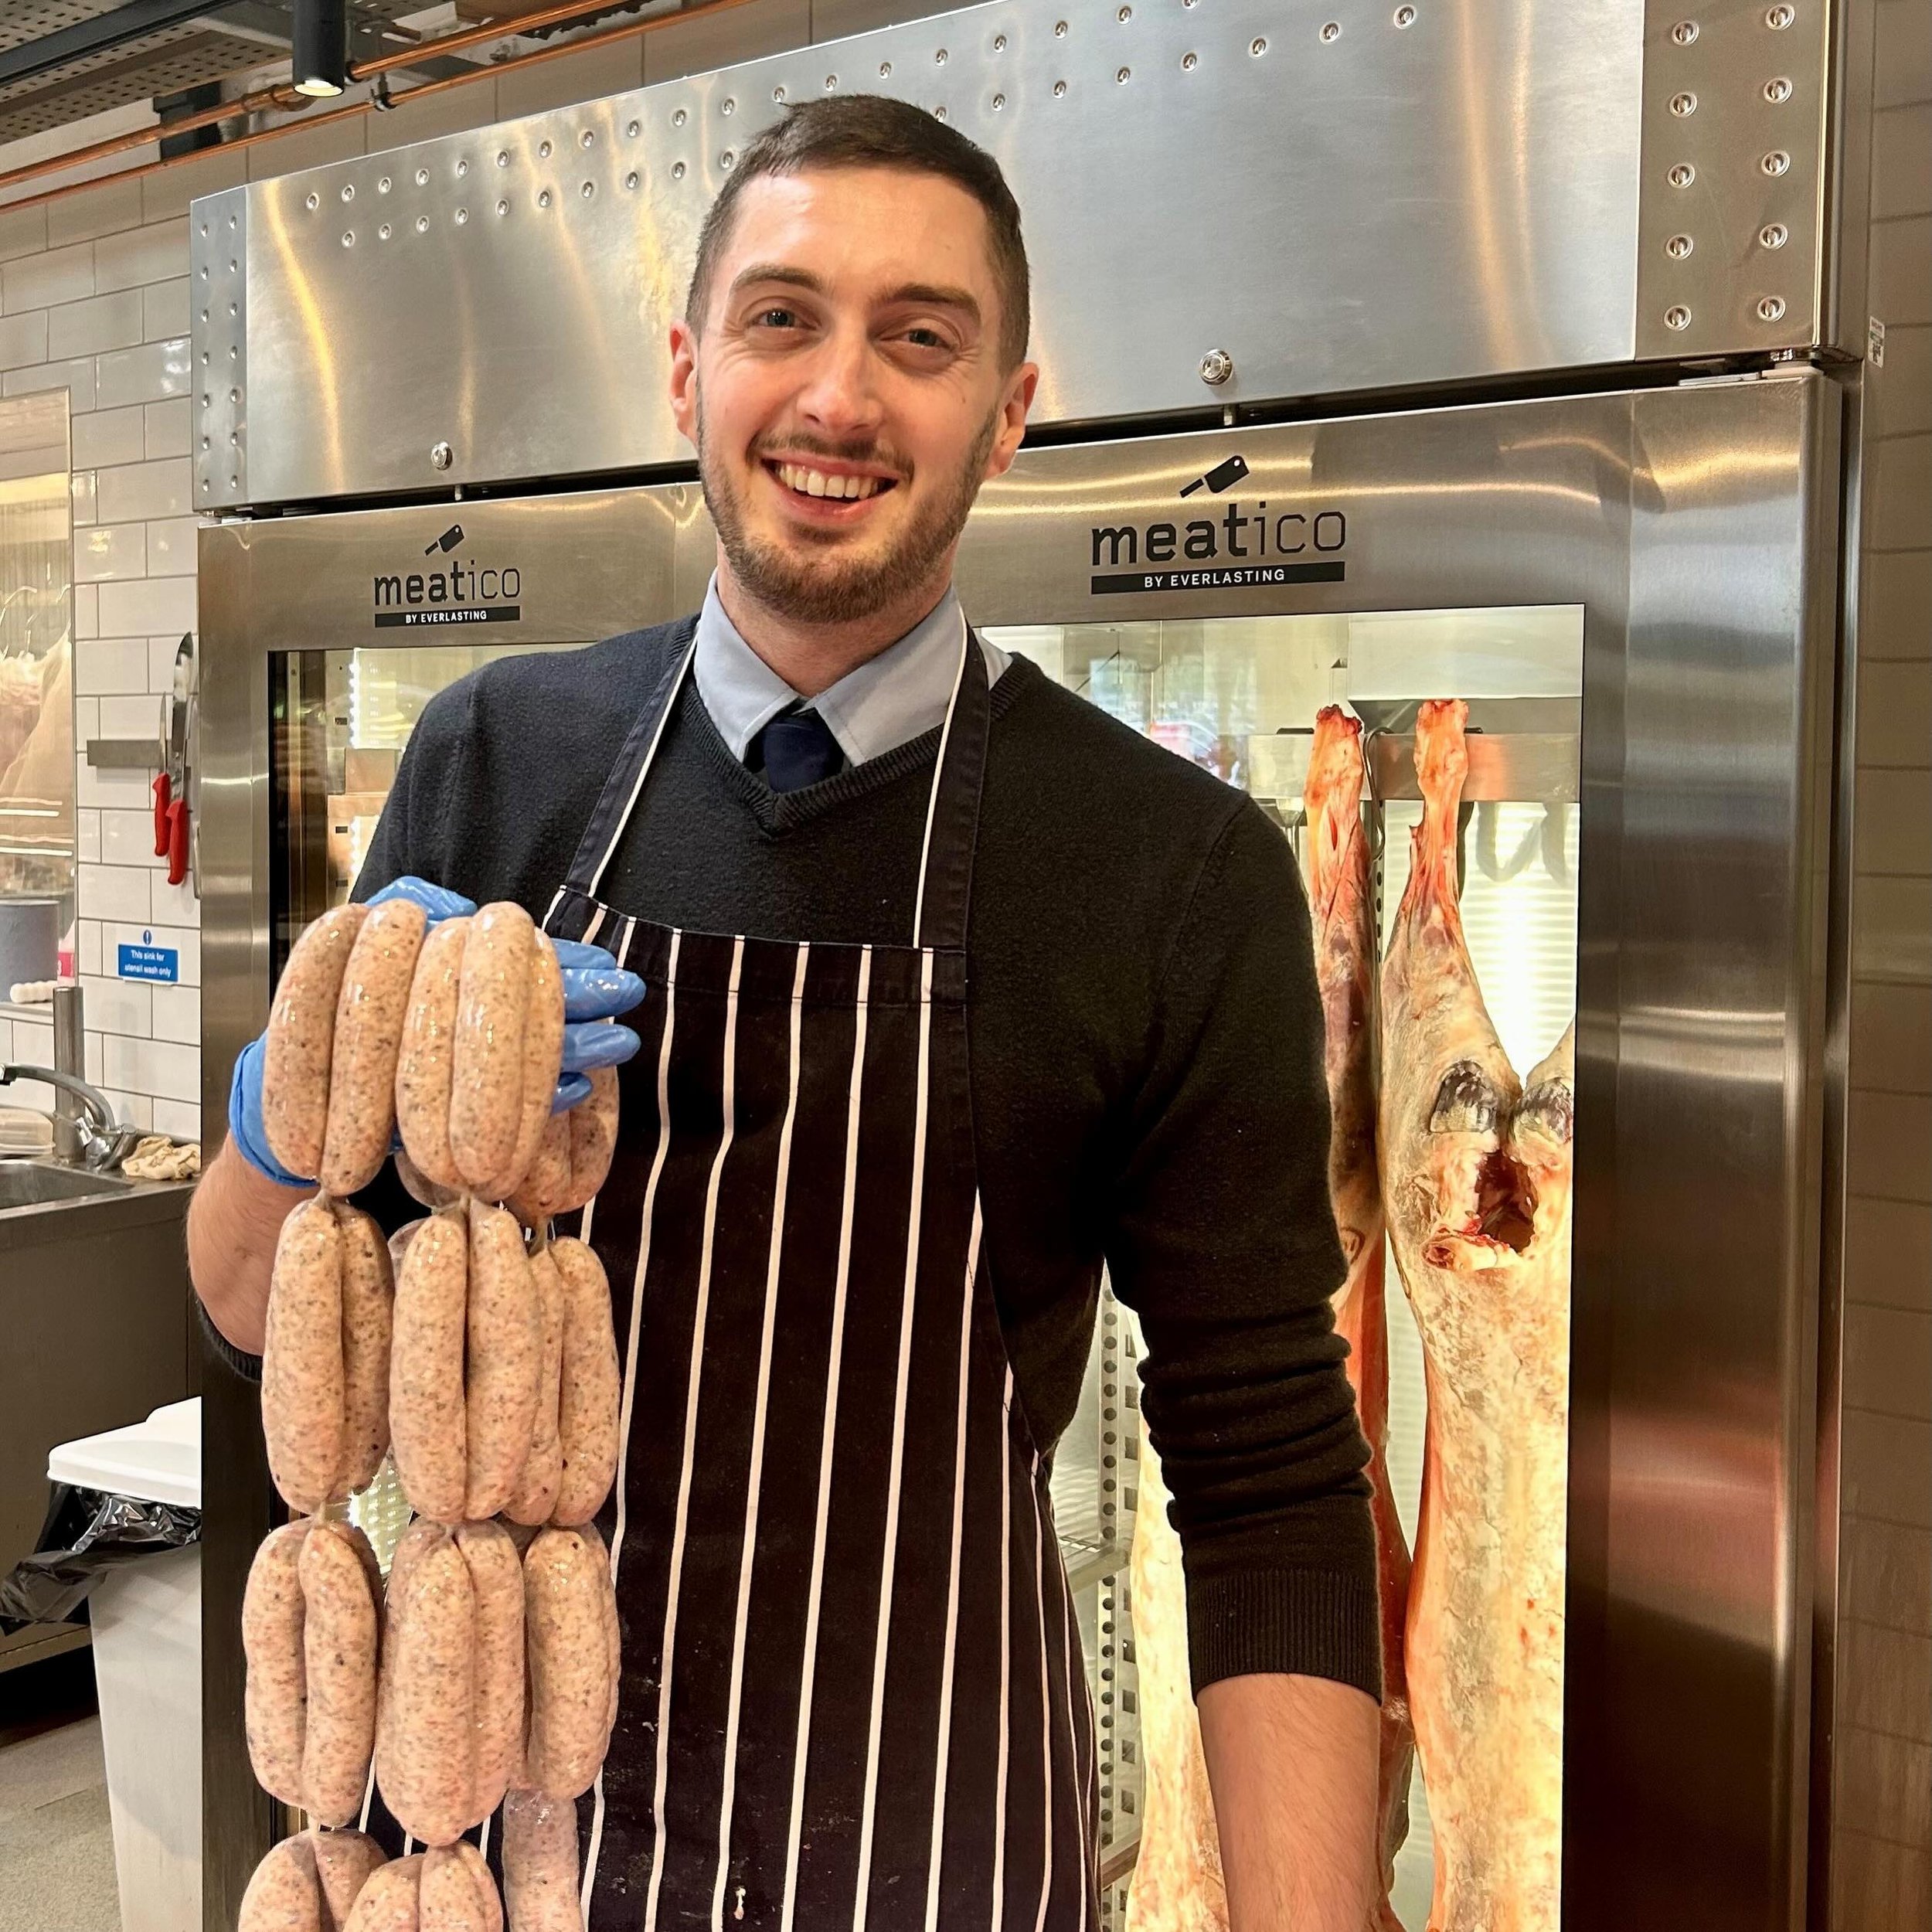 Are you free next Wednesday (15th May)? If so, we invite you to join us for a hands-on sausage-making workshop with our expert butchers!🌿

During the workshop, you will learn how to break down a pig into all of its cuts, and with the help of our hea